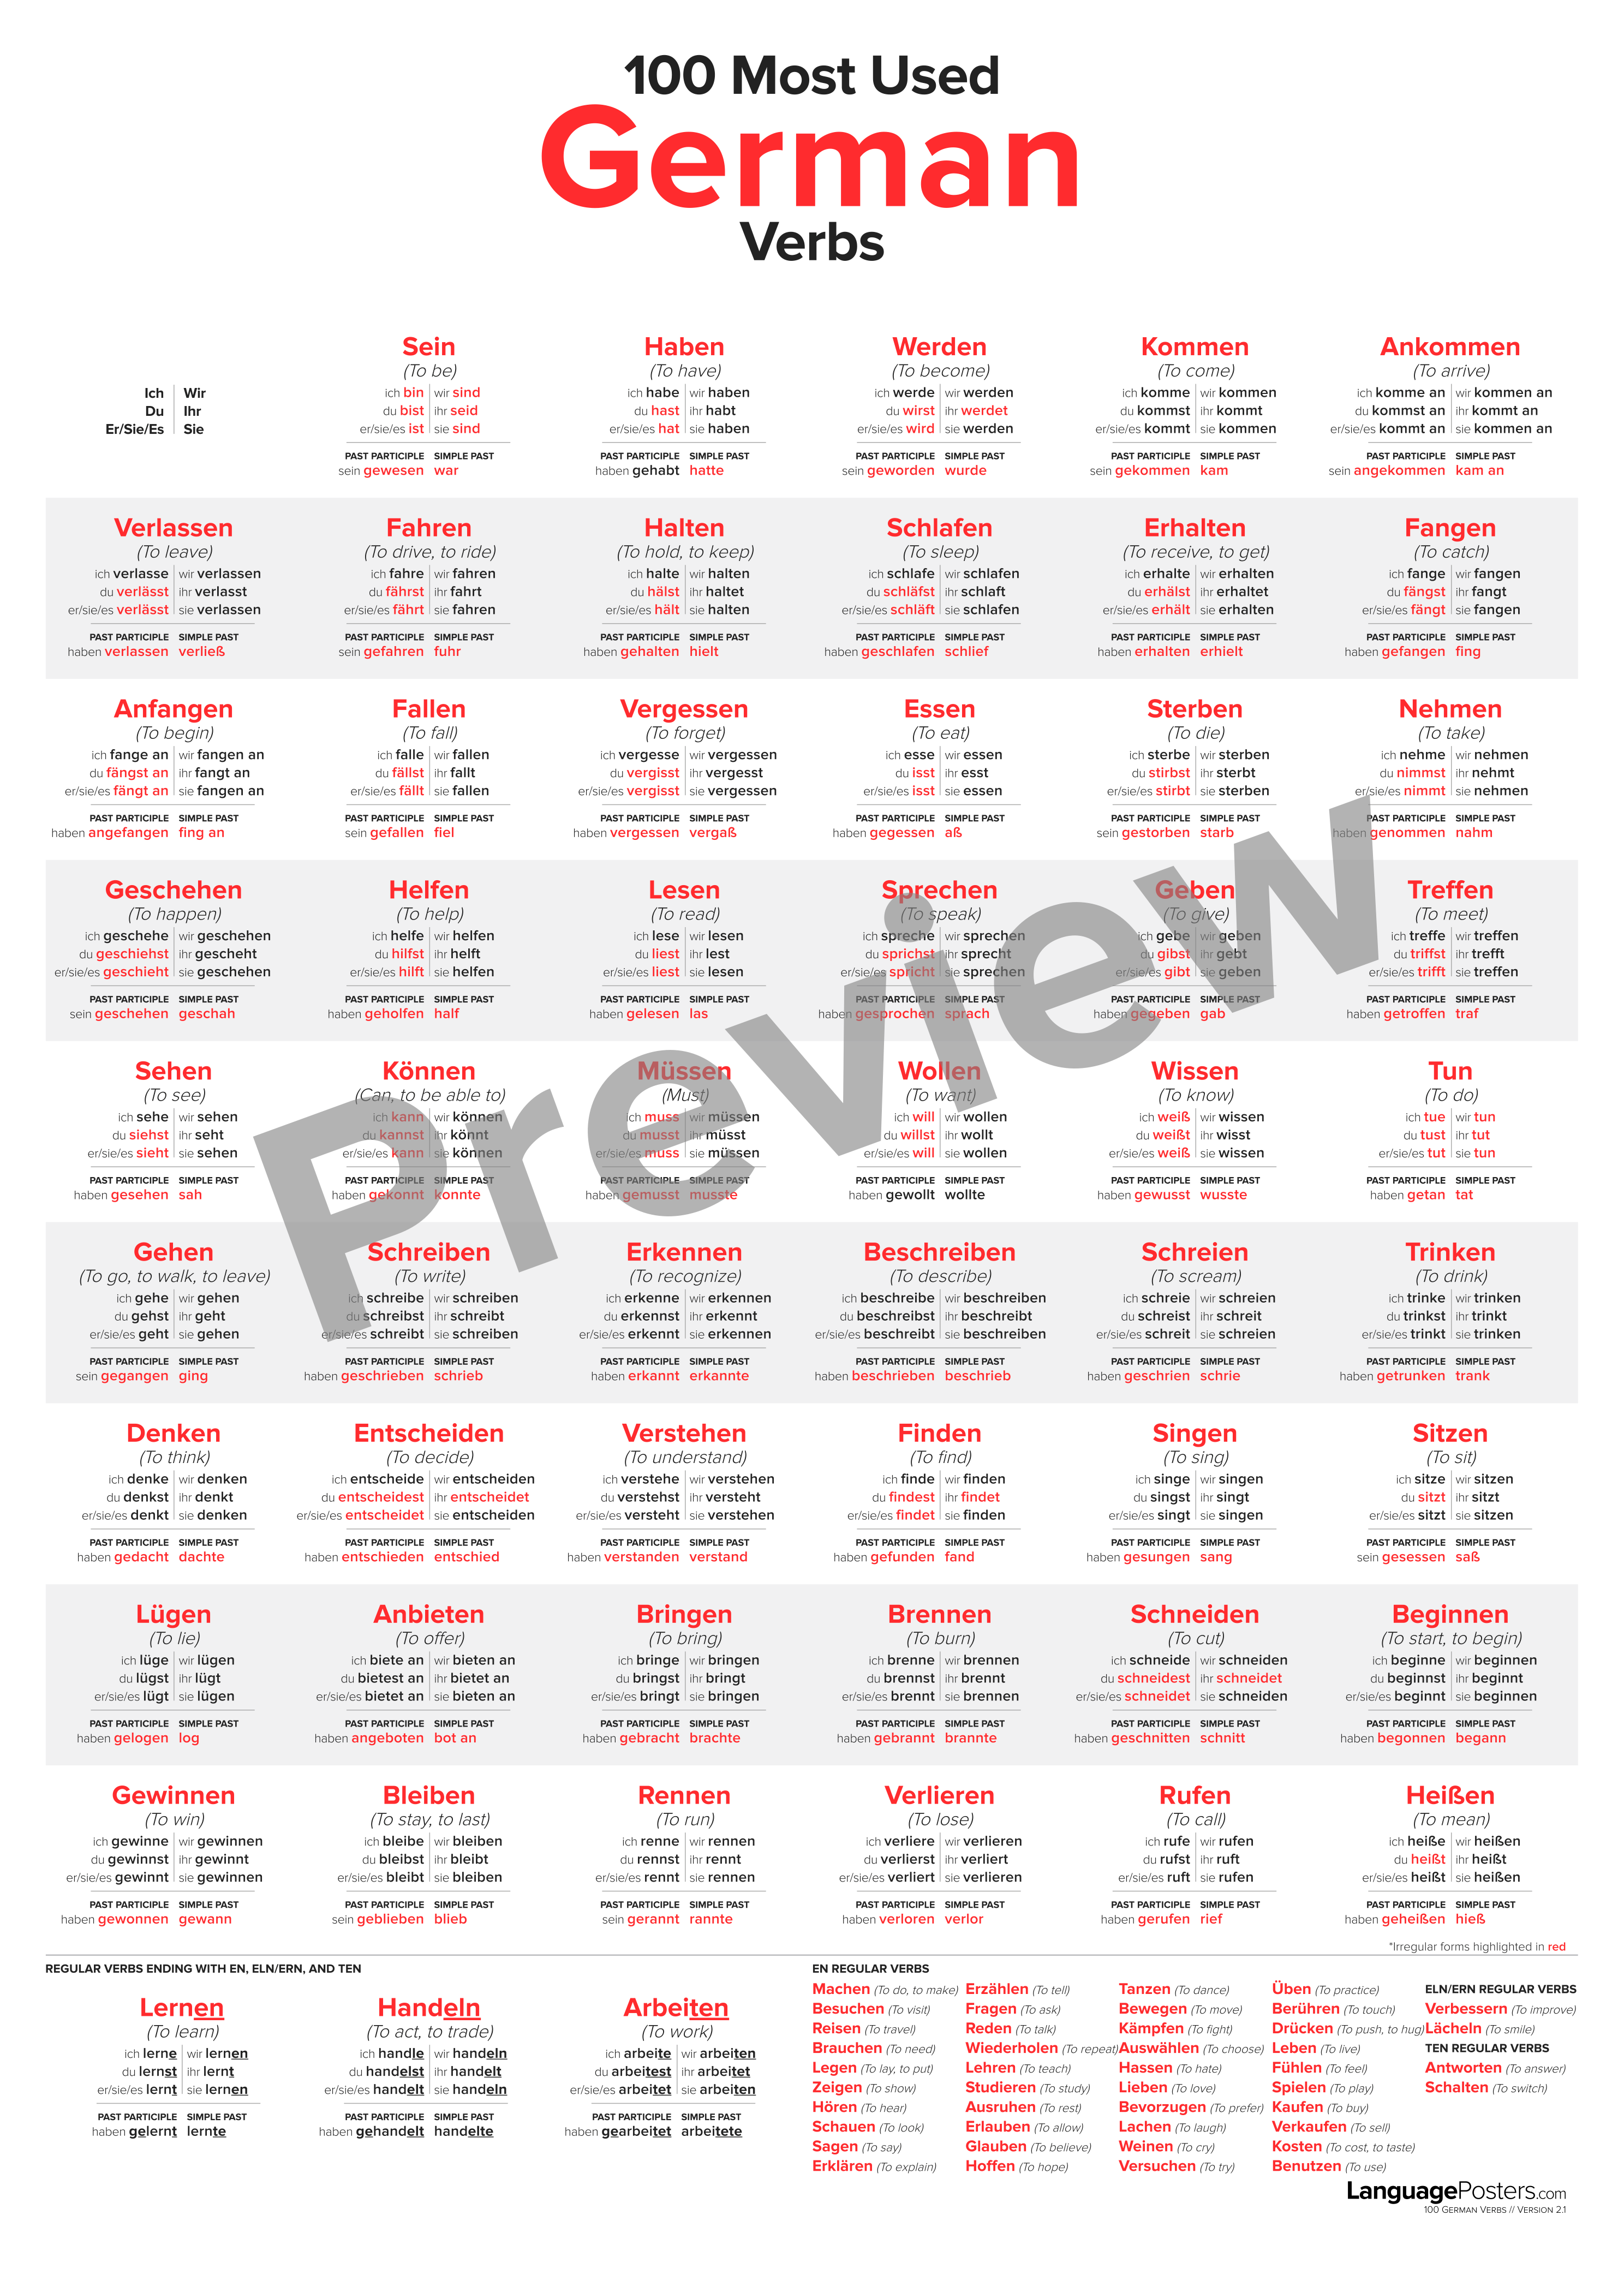 100 Most Used German Verbs Poster Preview - LanguagePosters.com